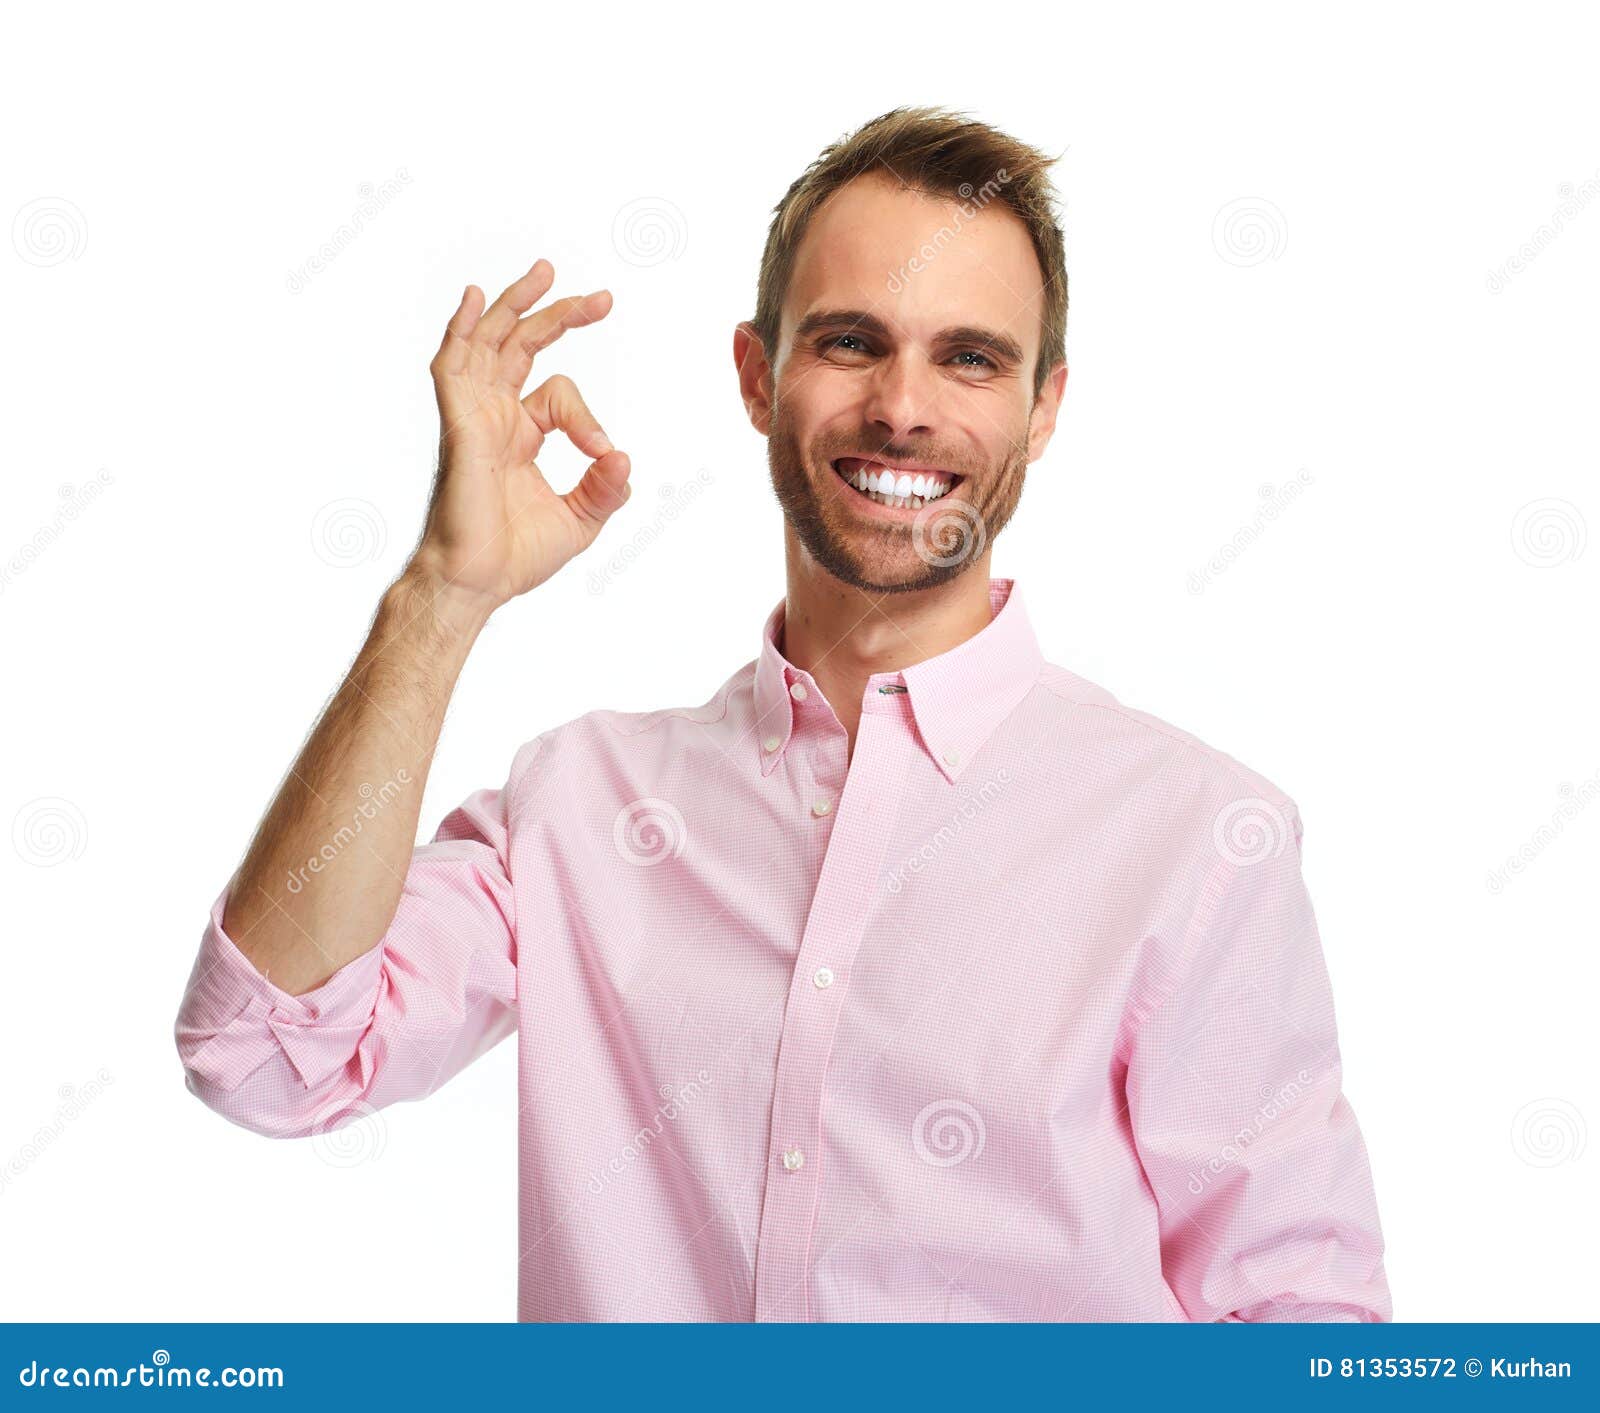 Happy man. stock photo. Image of casual, expressions - 81353572